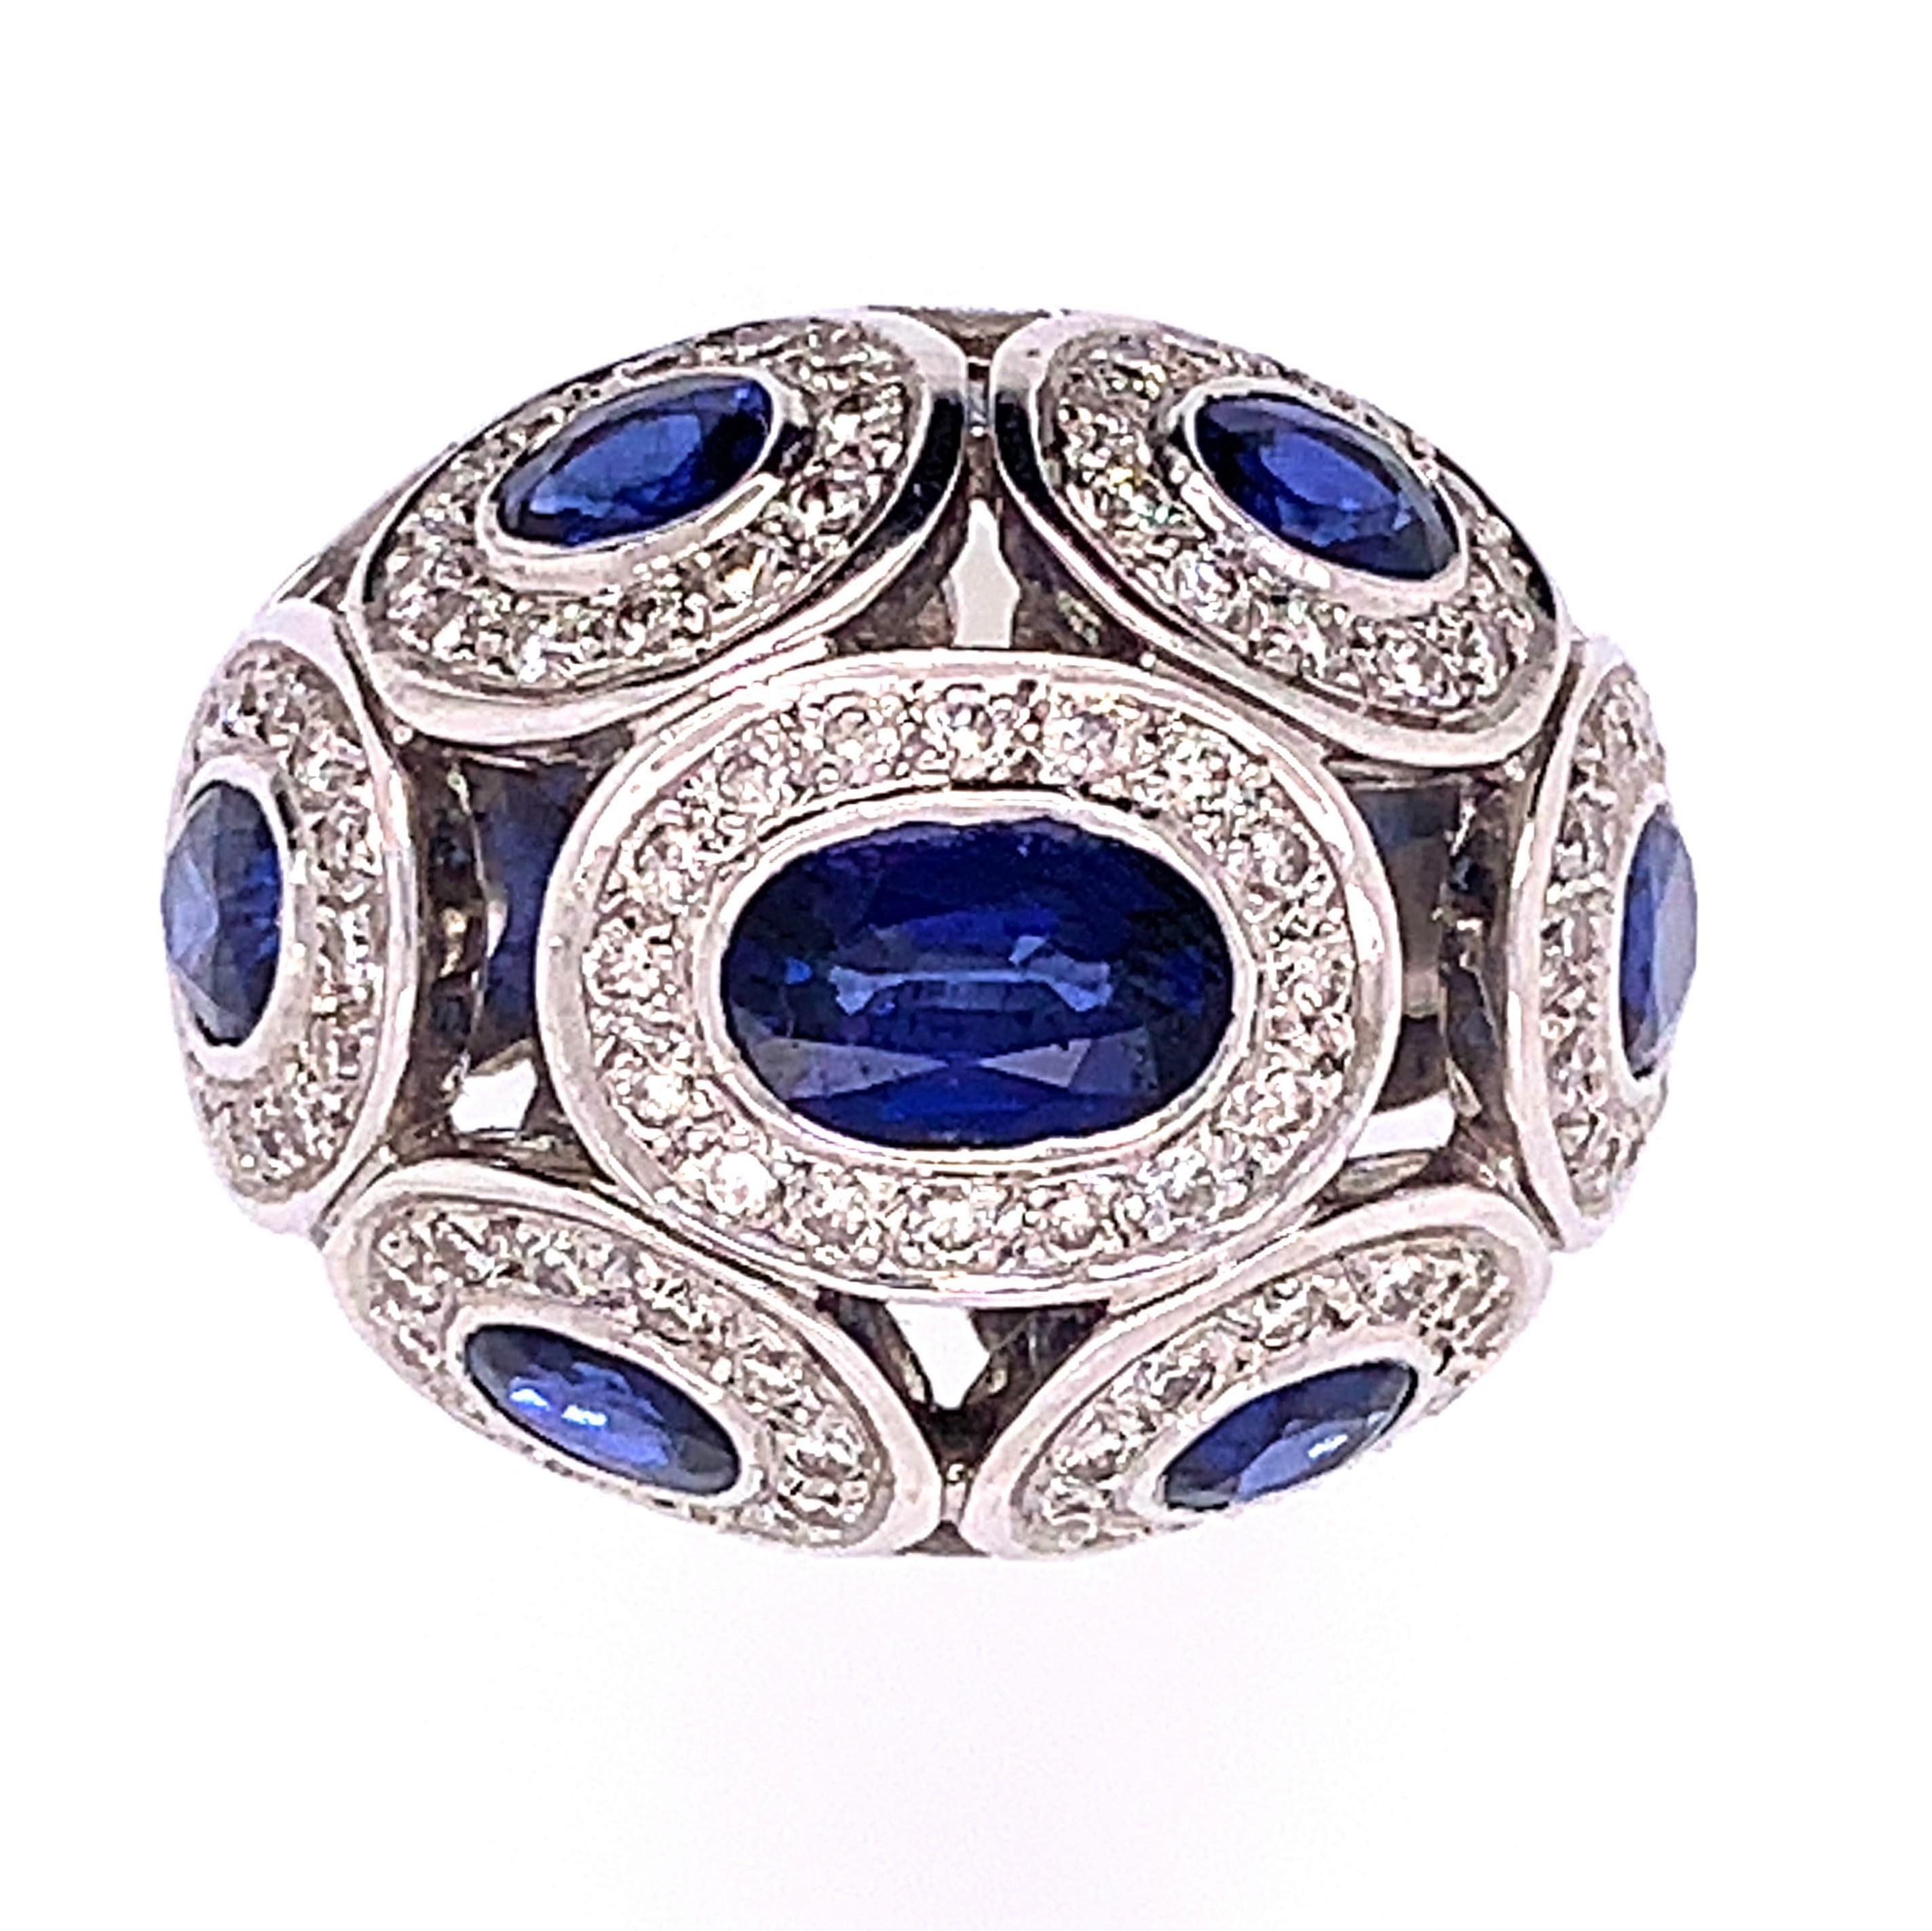 Women's or Men's 4.63 Carat Blue Oval Sapphire and Diamond Ring